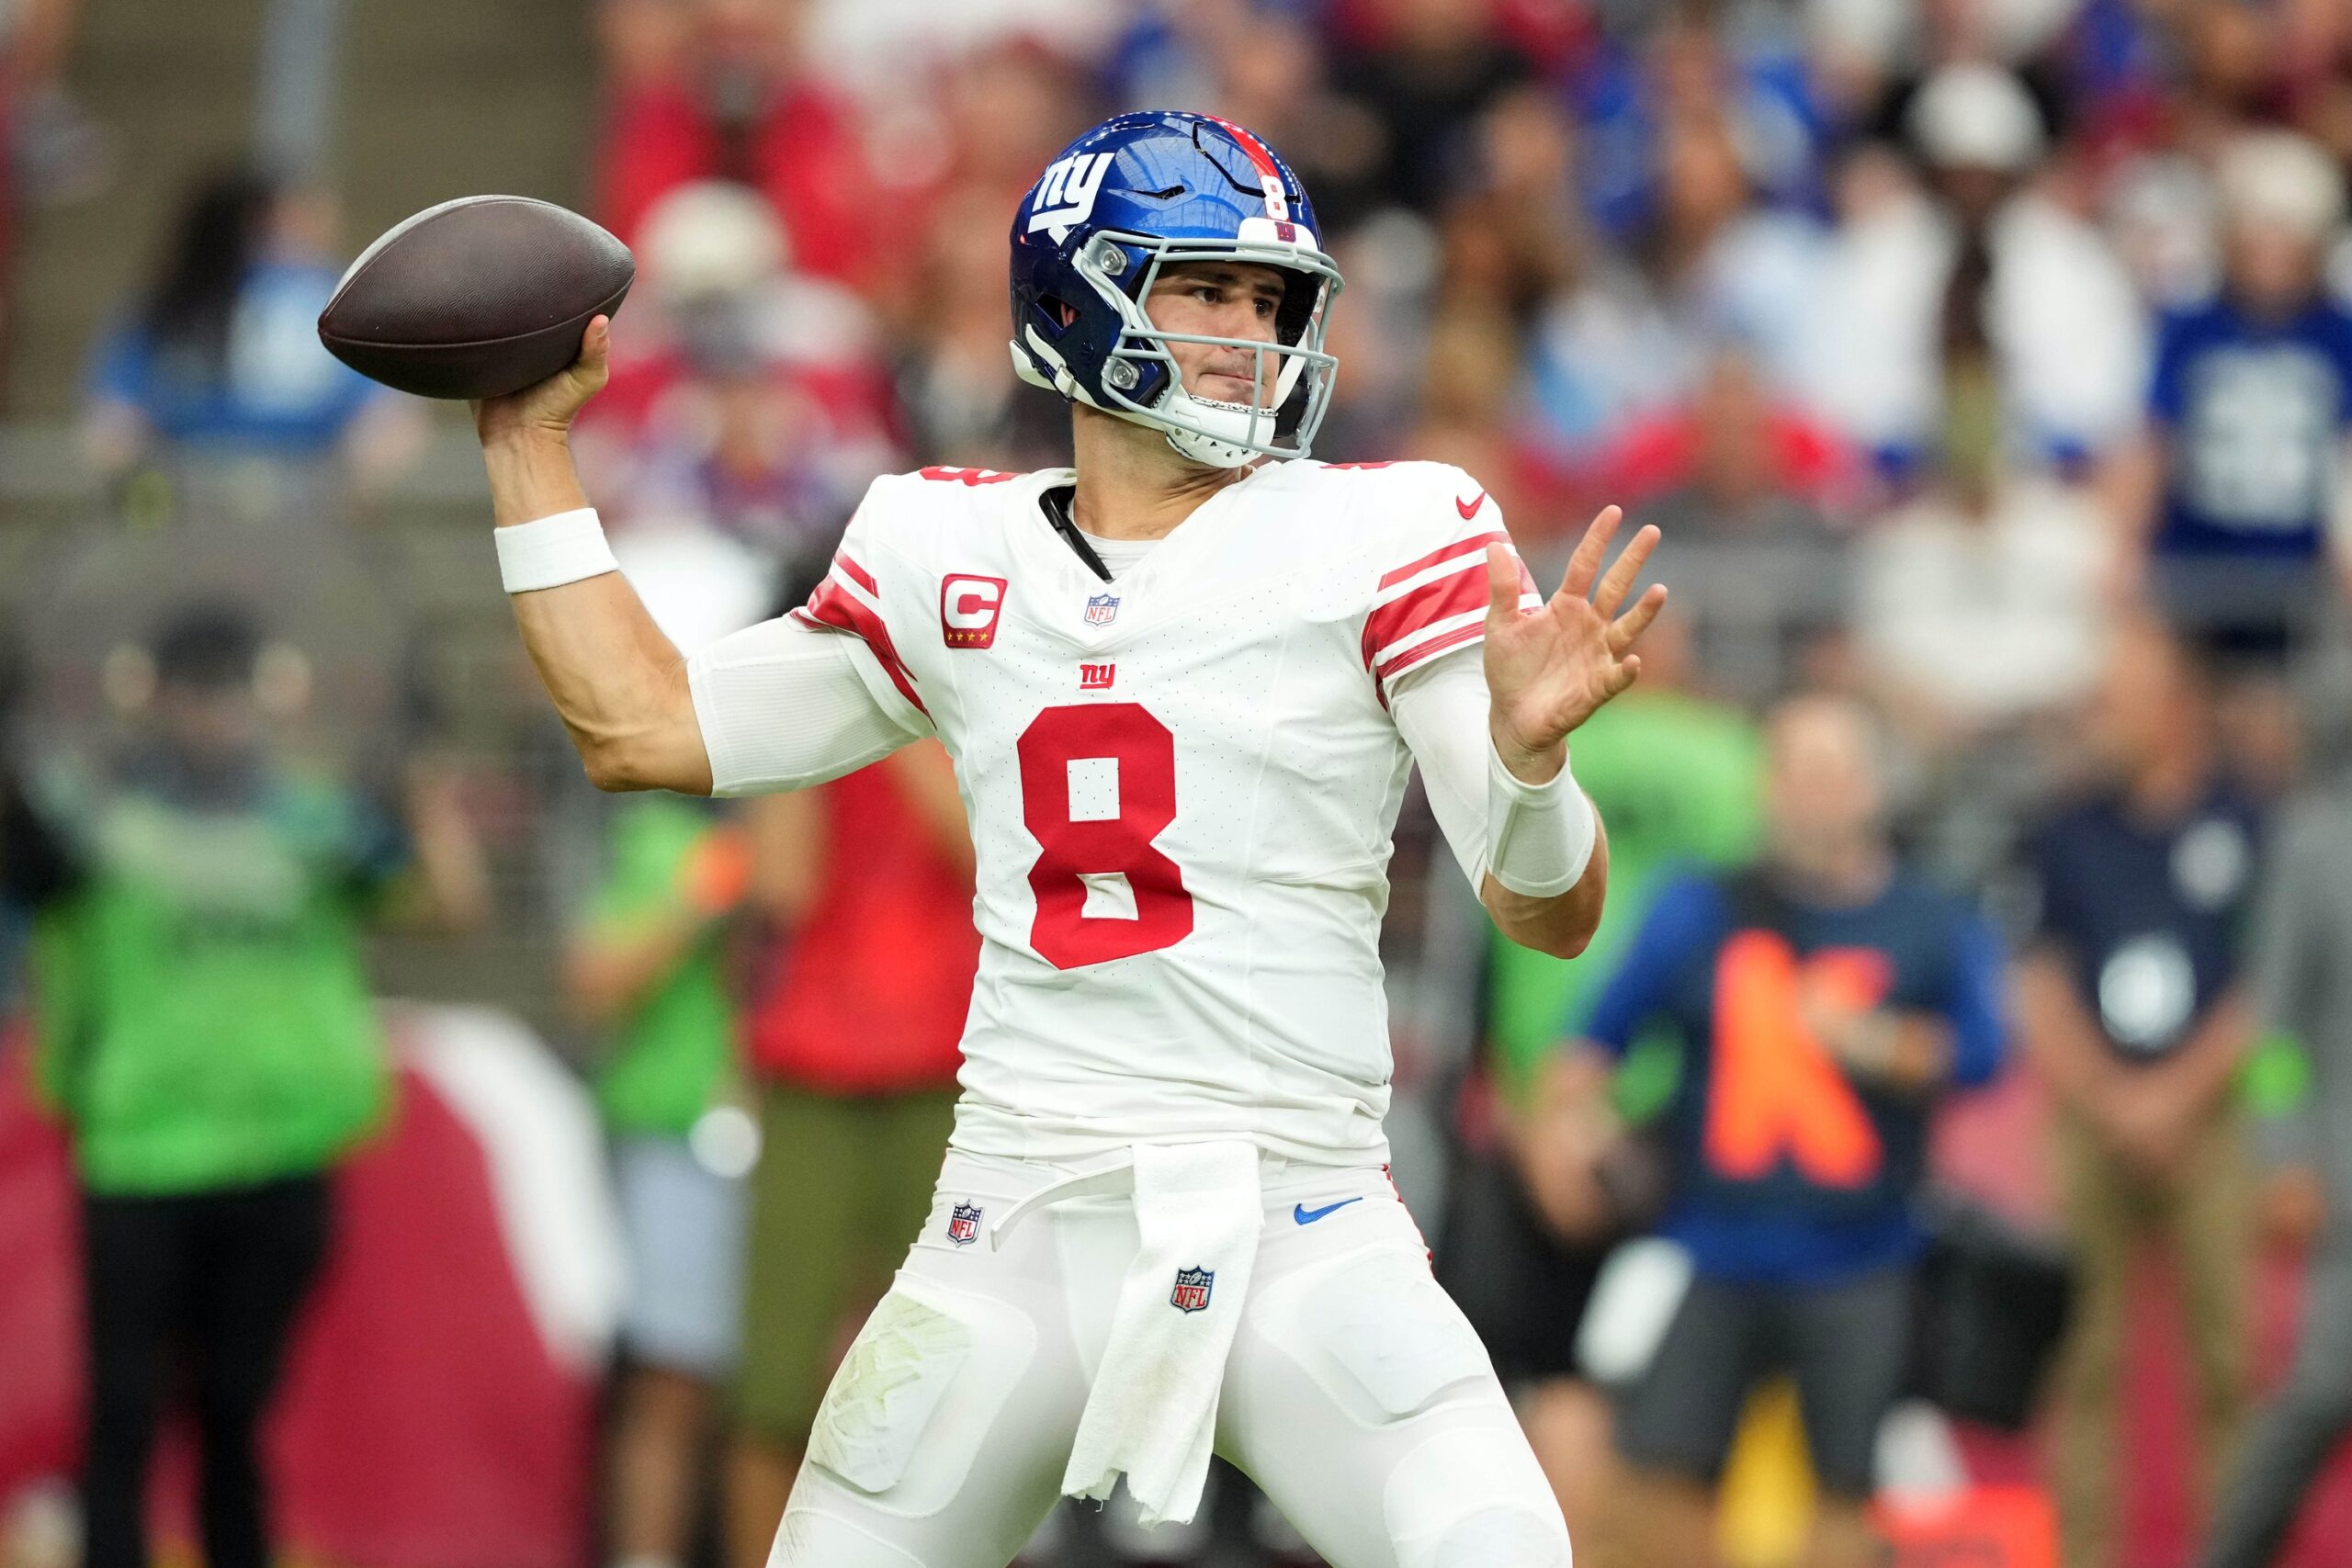 Giants' Daniel Jones evaluation complicated due to team's roster